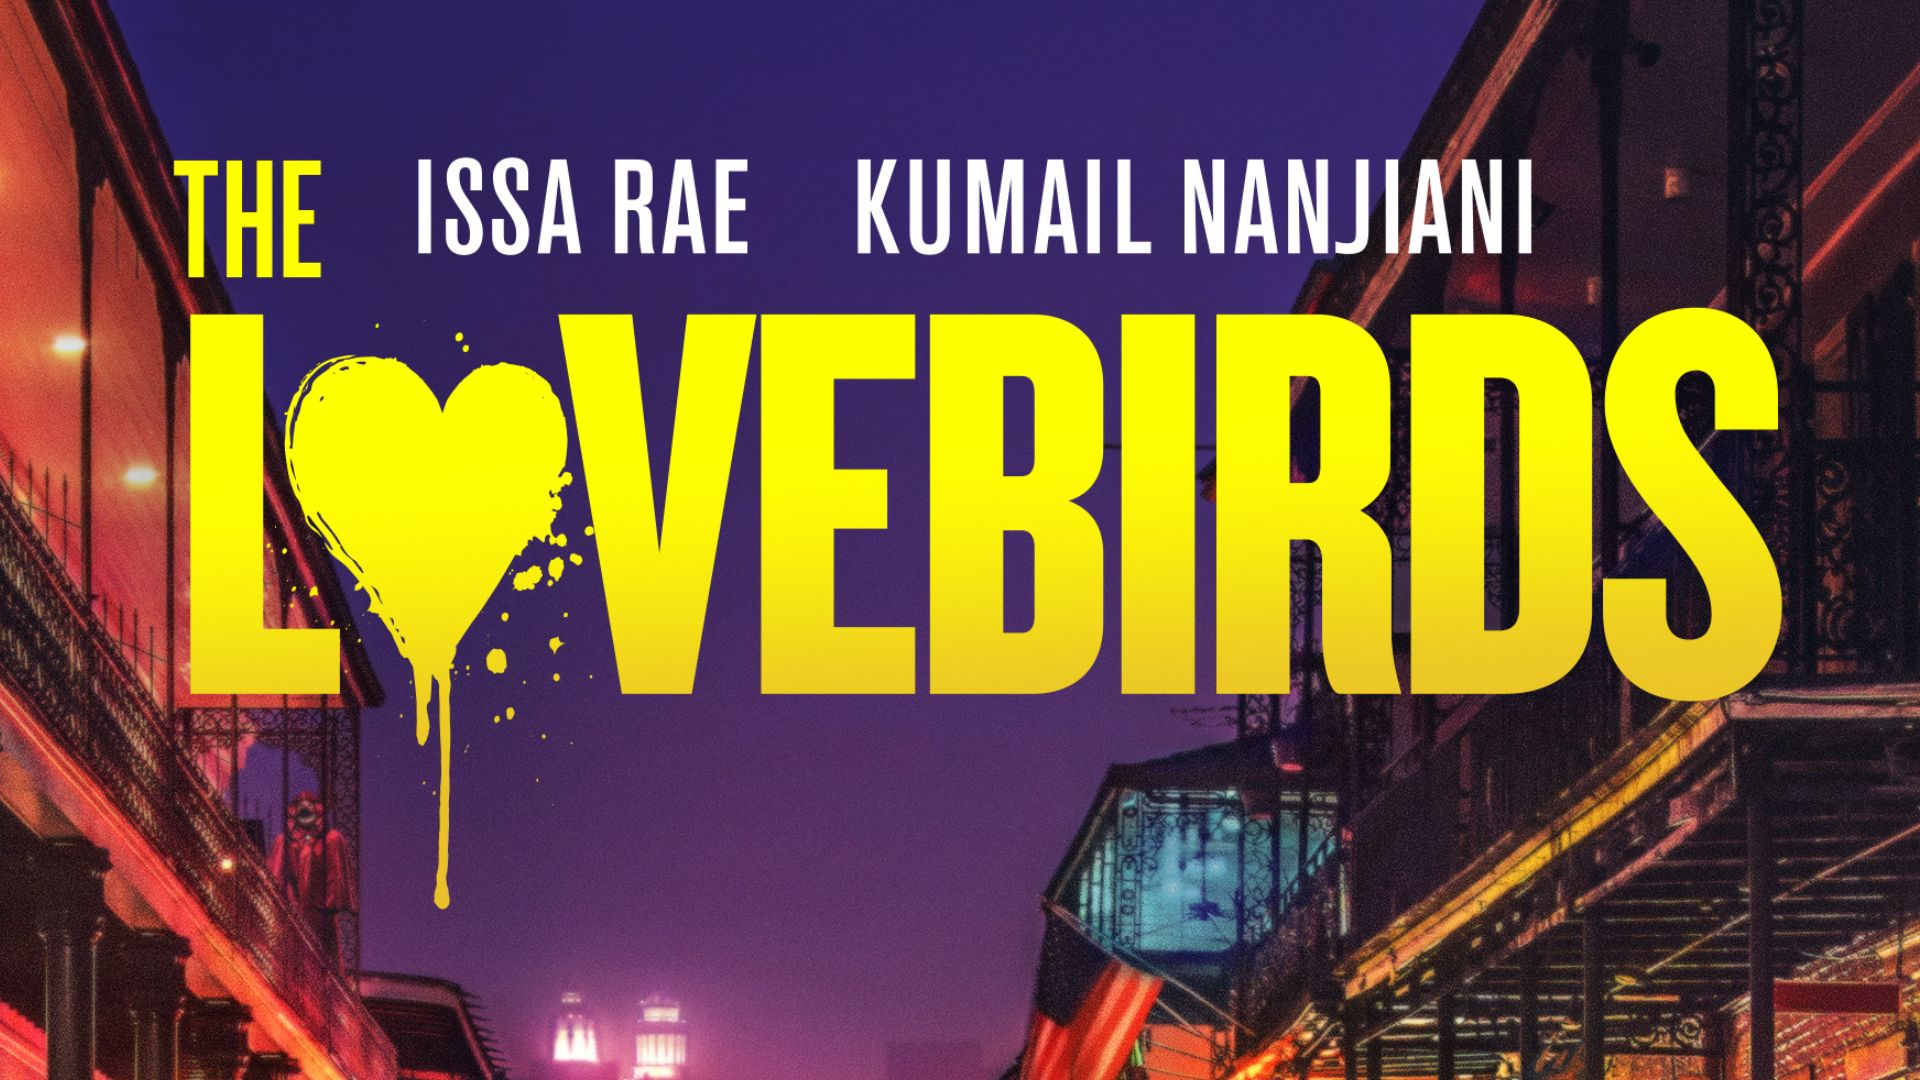 Paramount sells The Lovebirds to Netflix due to the theater